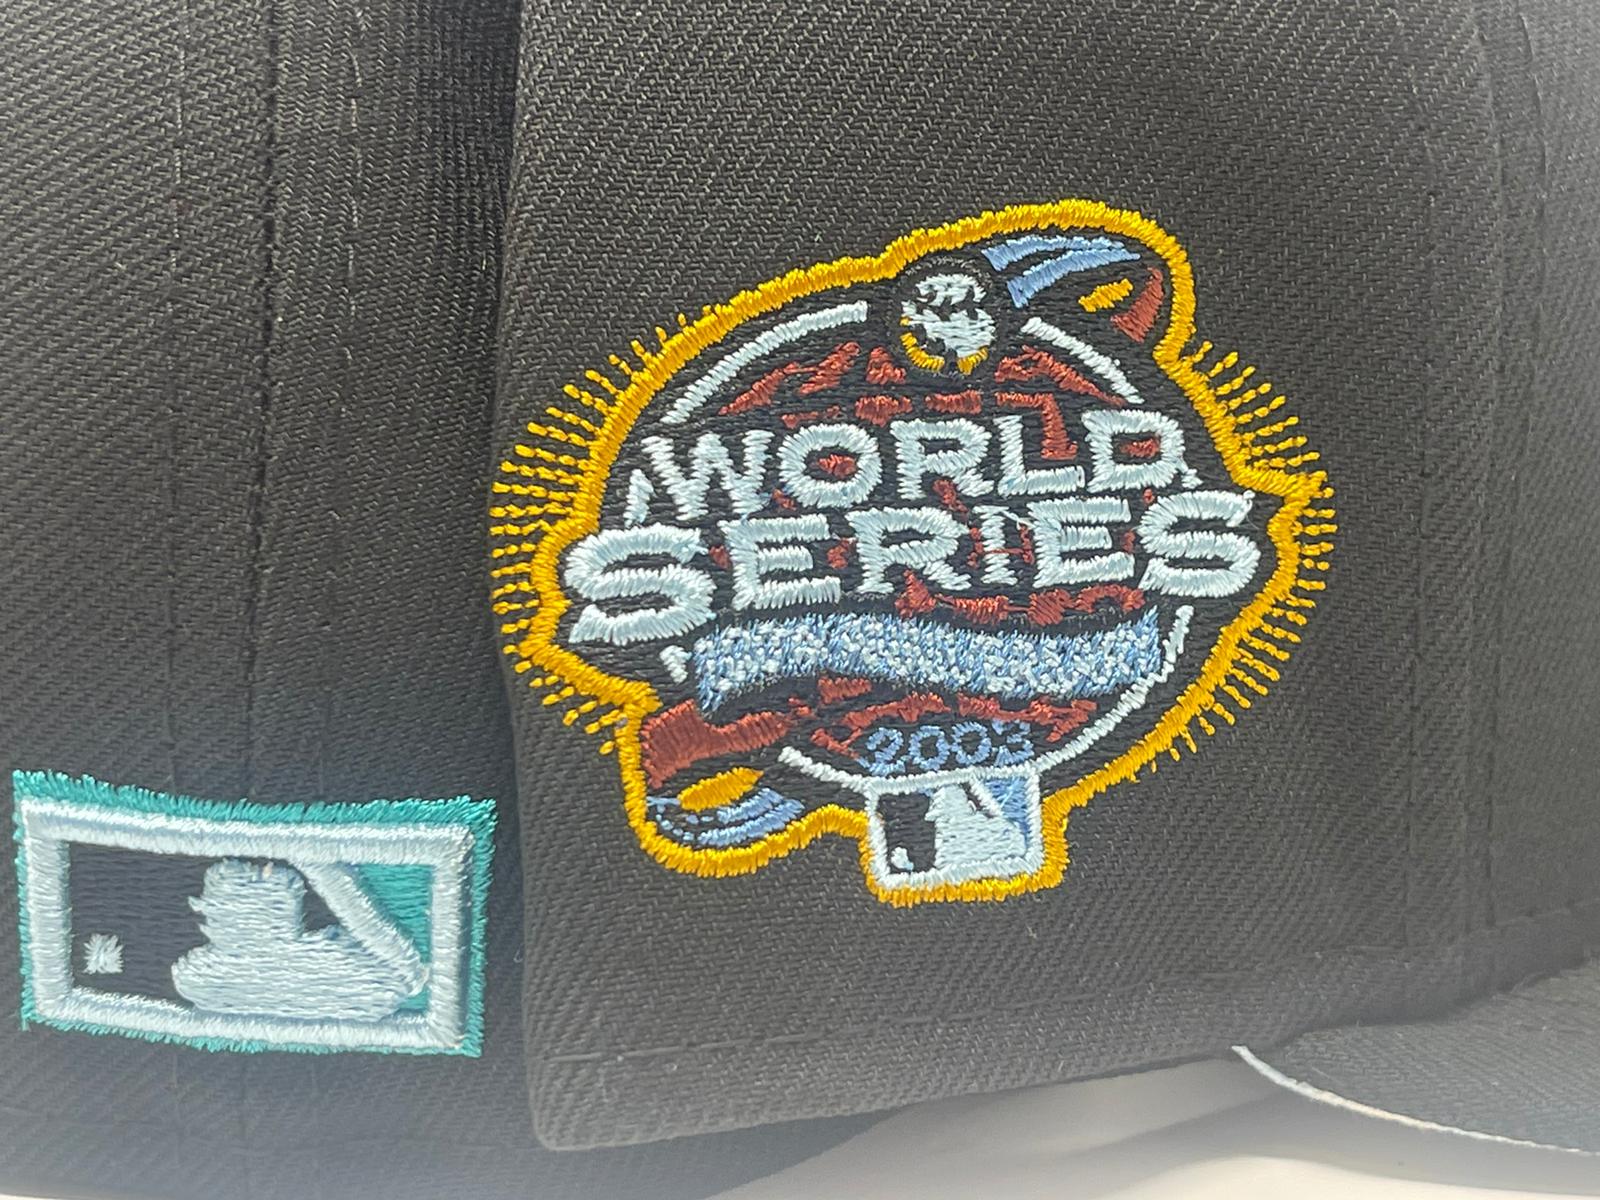 Florida Marlins 2003 World Series Volt Infrared 59Fifty Fitted Hat